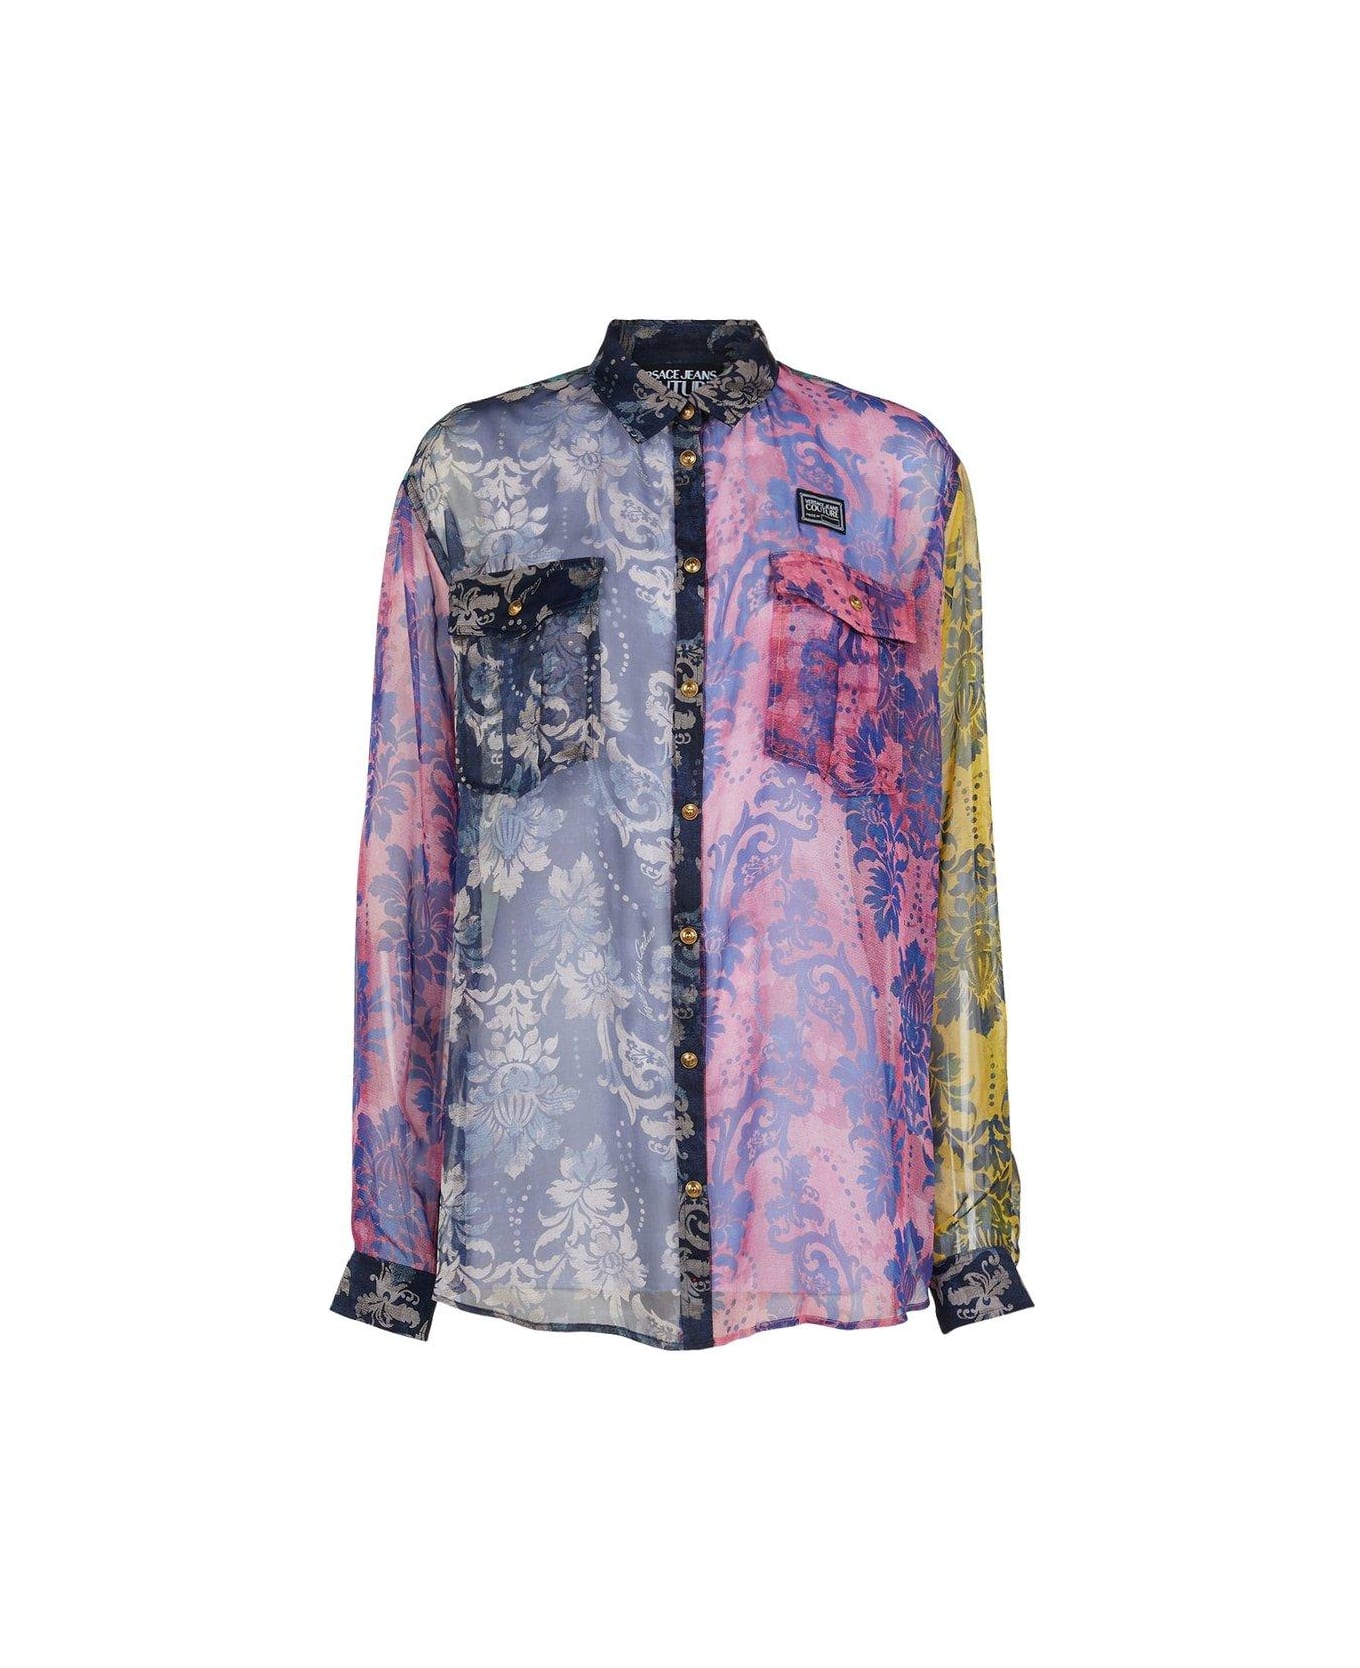 Versace Jeans Couture Semi-sheer Panelled Shirt Versace Jeans Couture - MULTICOLOR ブラウス